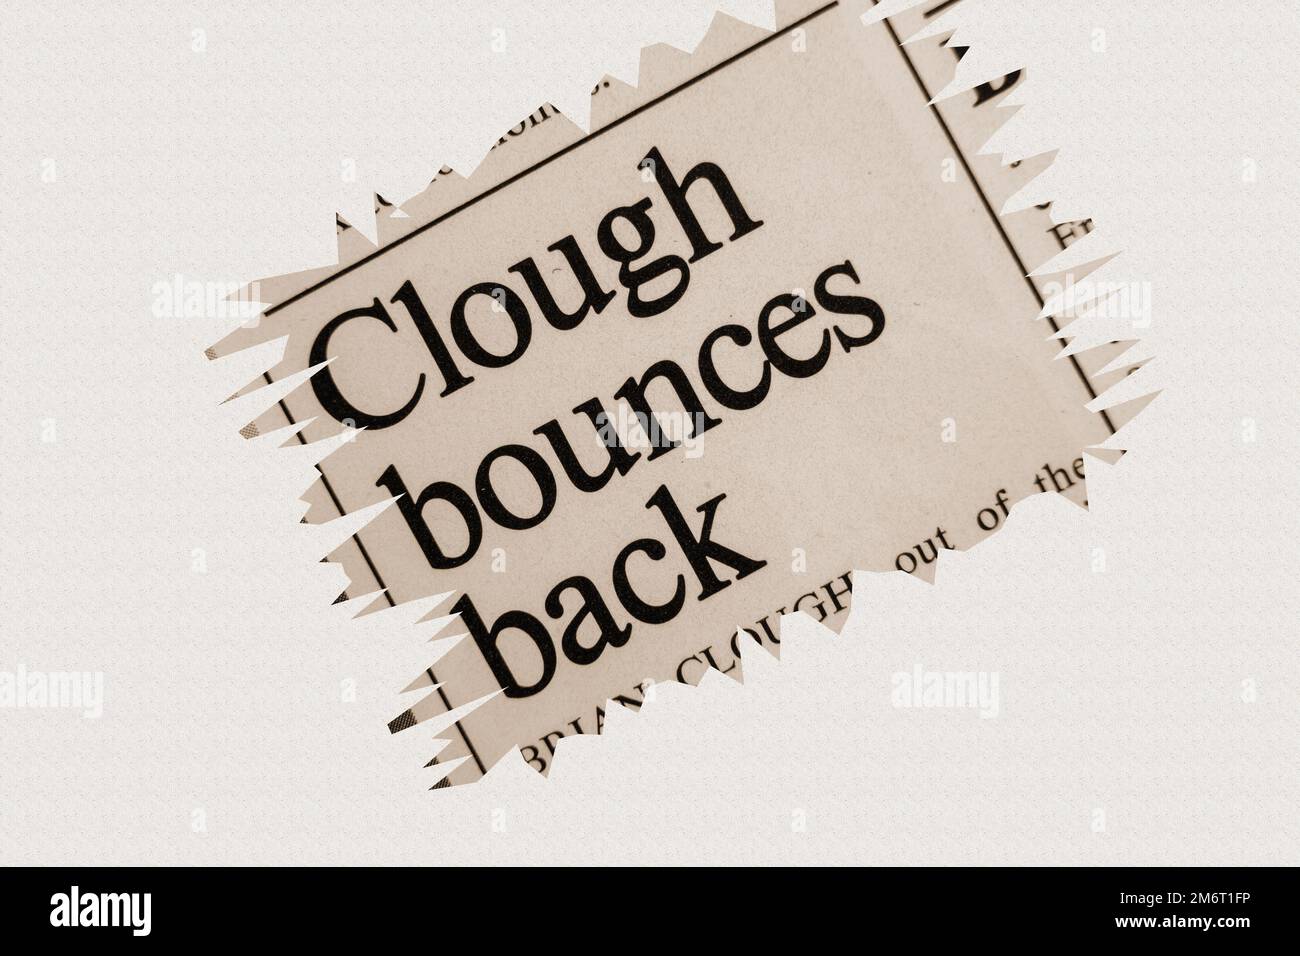 news story from 1975 newspaper headline article title - Clough bounces back in sepia Stock Photo